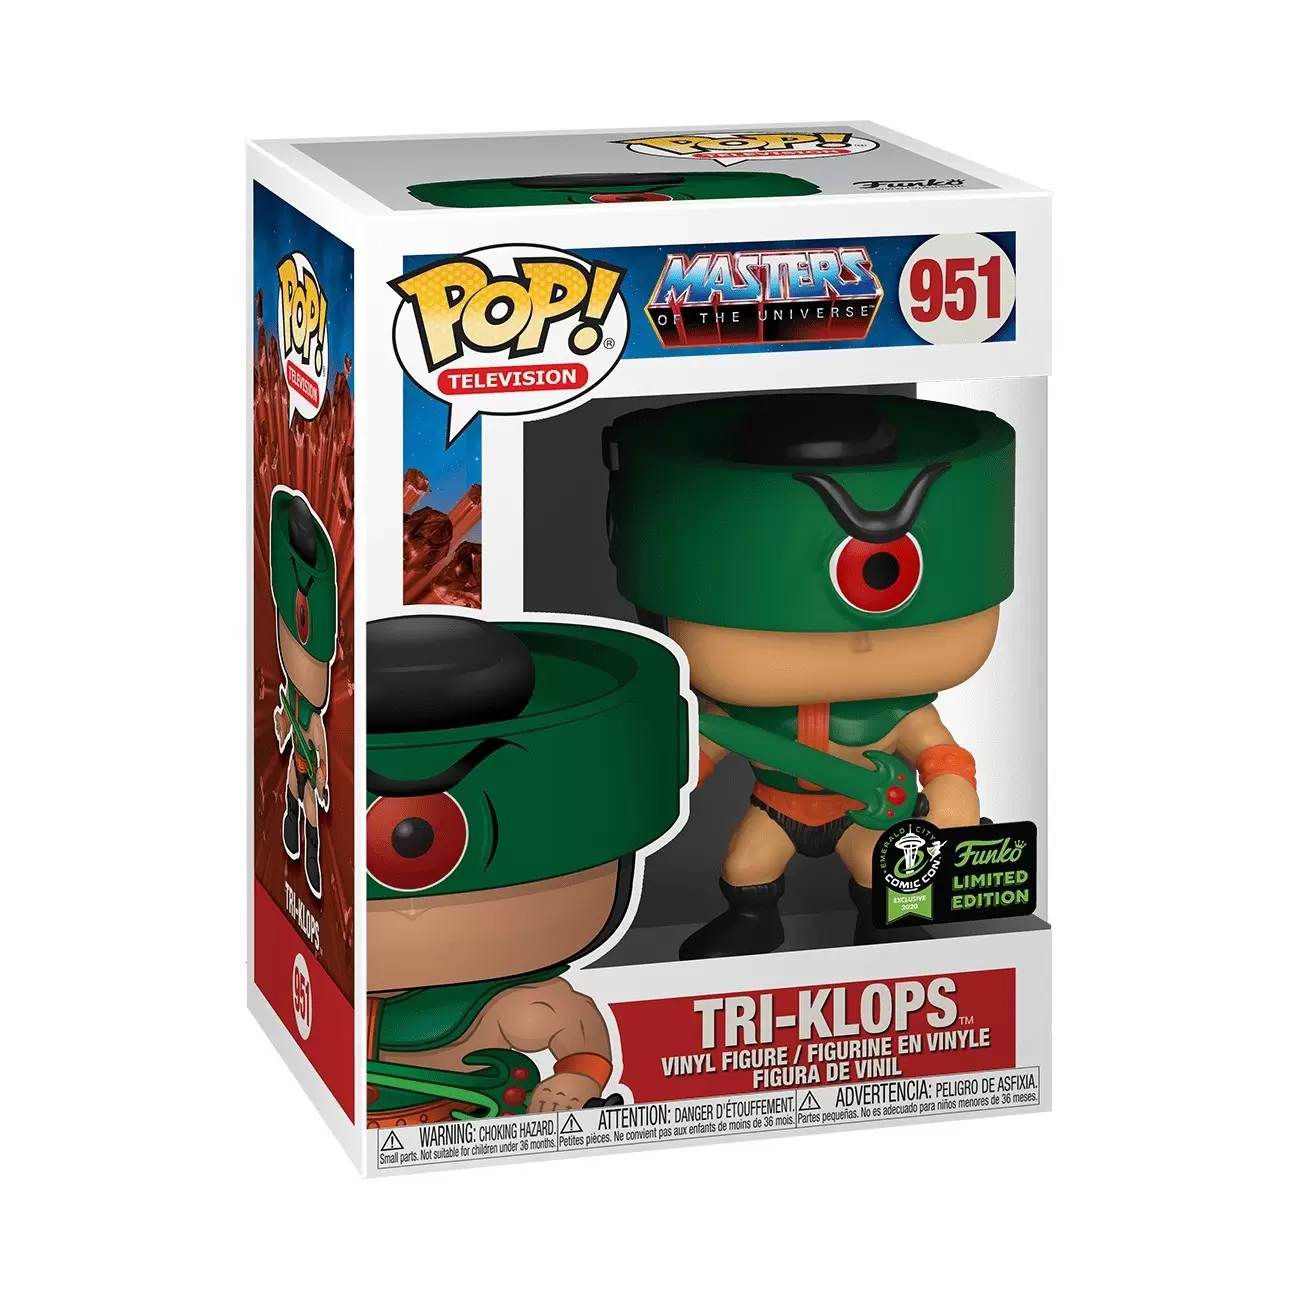 POP! Television - Masters of the Universe - Tri-Klops